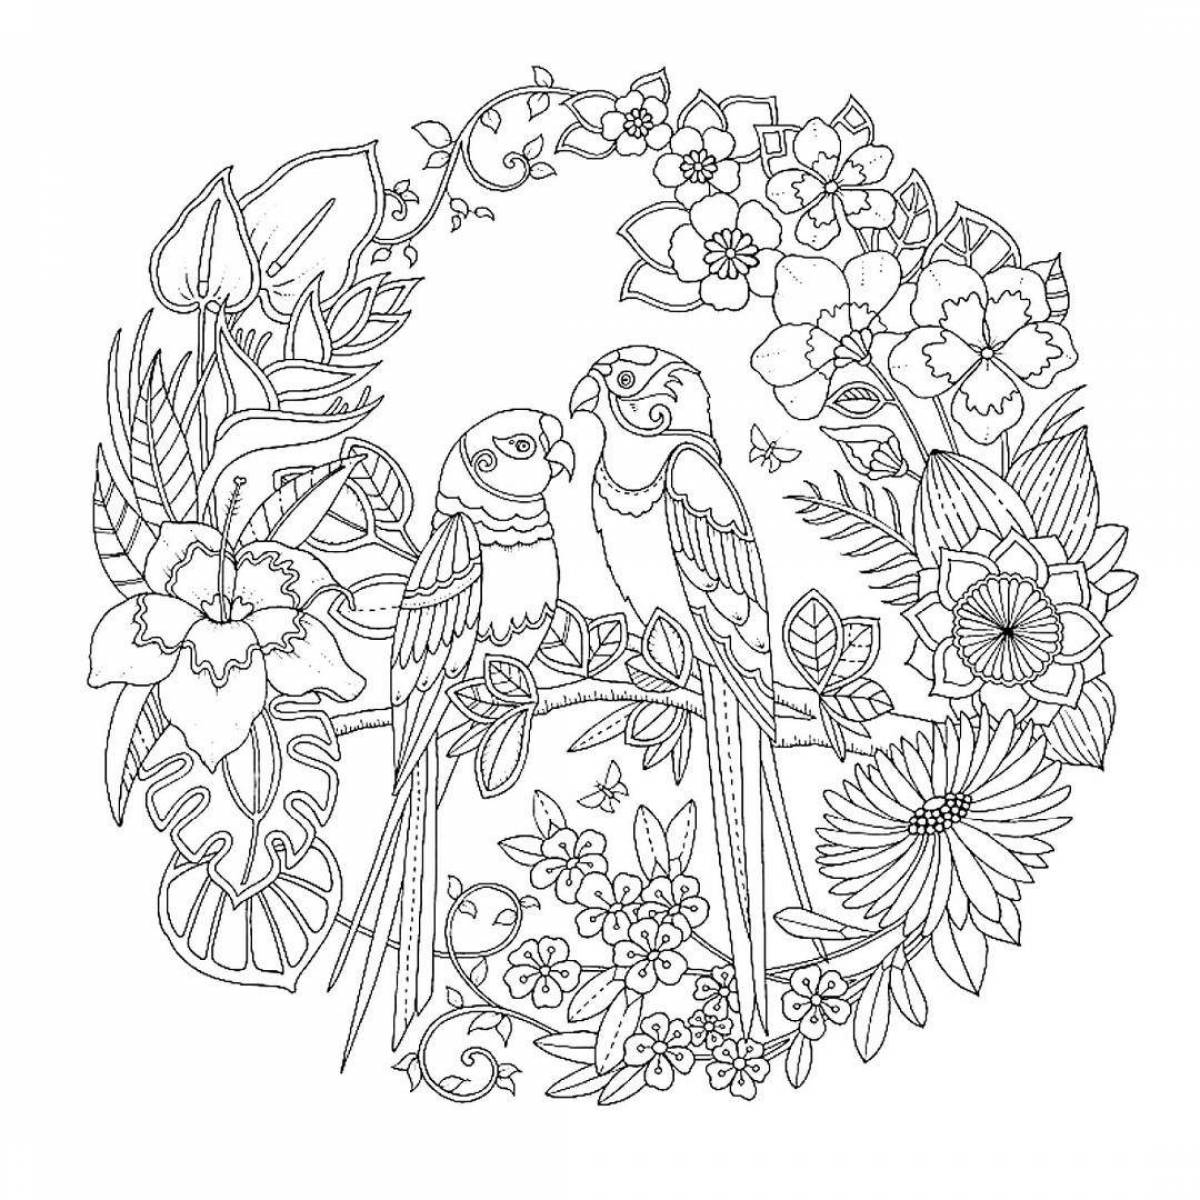 Joanna basford's amazing coloring page